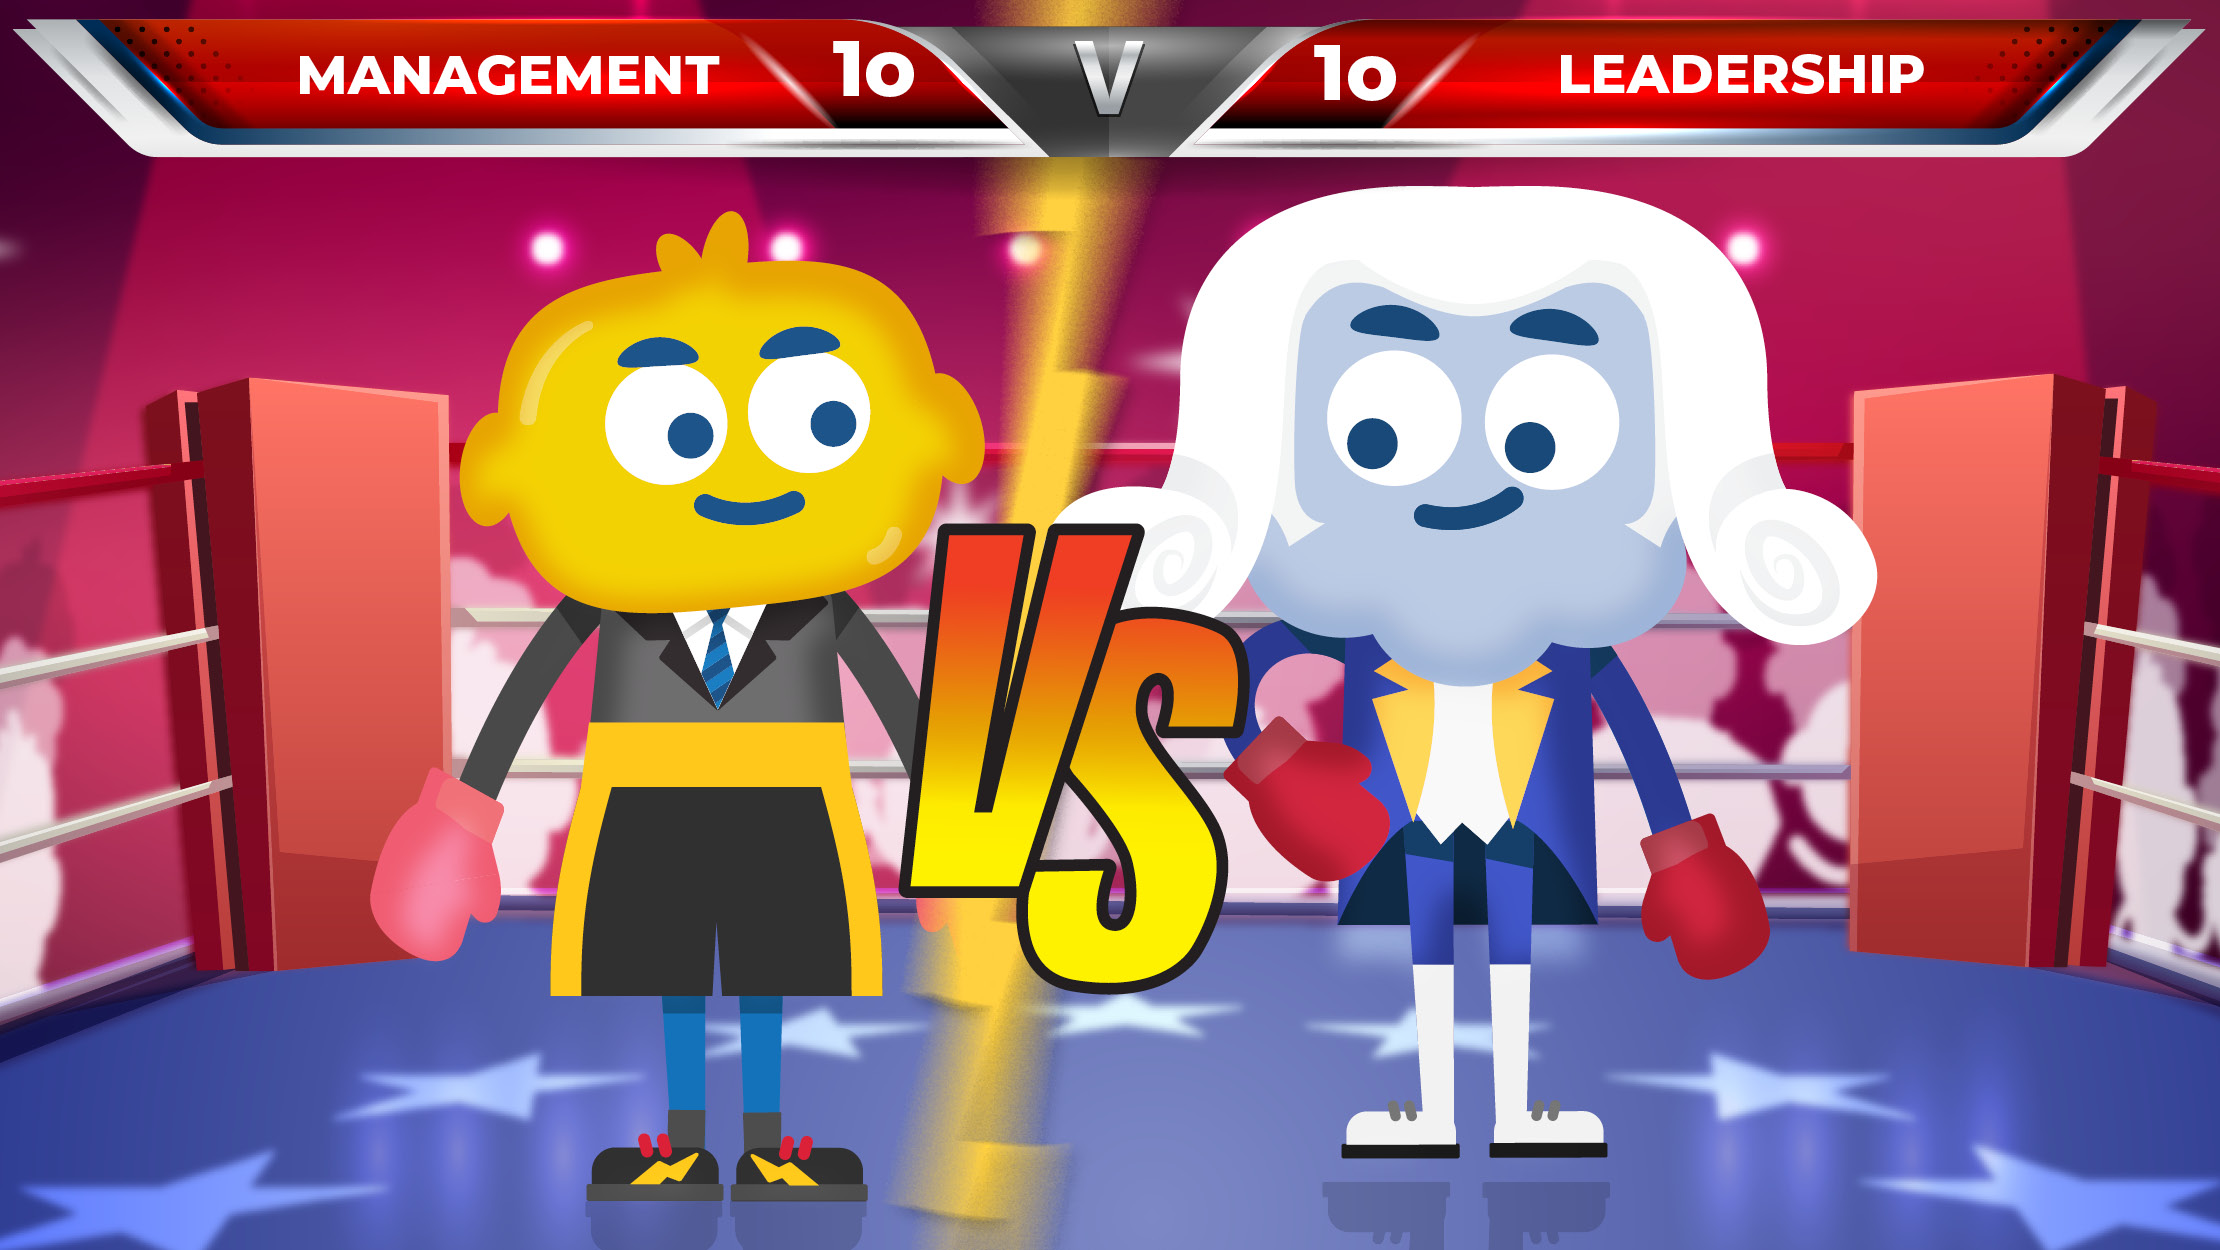 managers vs leaders online training course